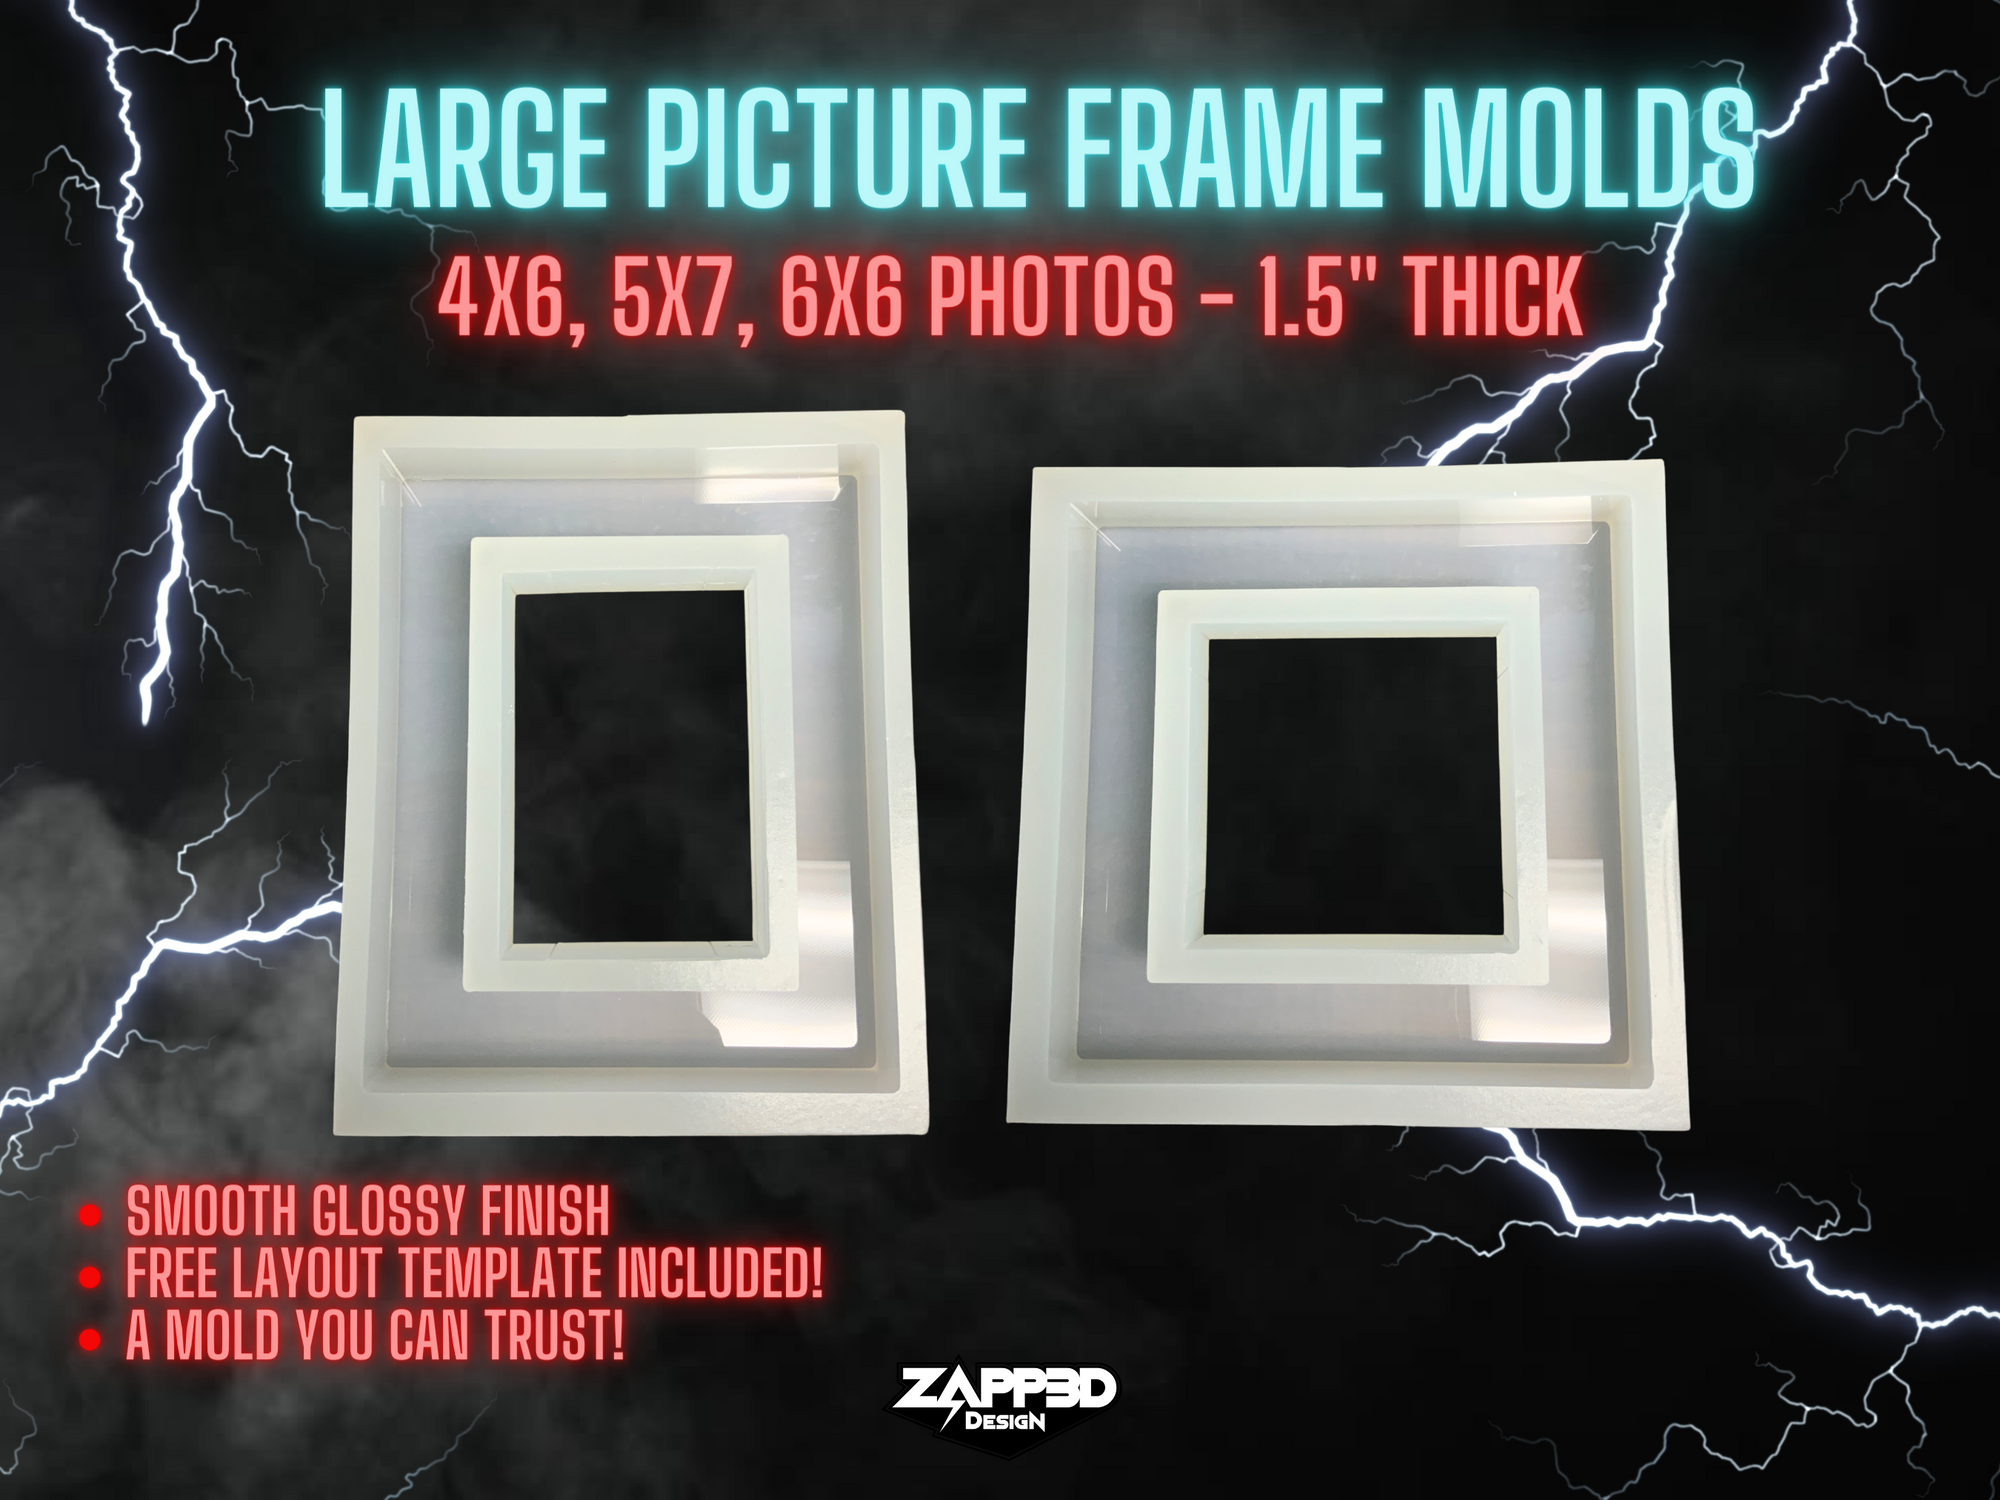 Picture Frame Mold | 1.5" Thick | 3 Sizes | Frame Mold, Deep Frame Mold, Large Picture Frame Mold, Photo Frame Mold